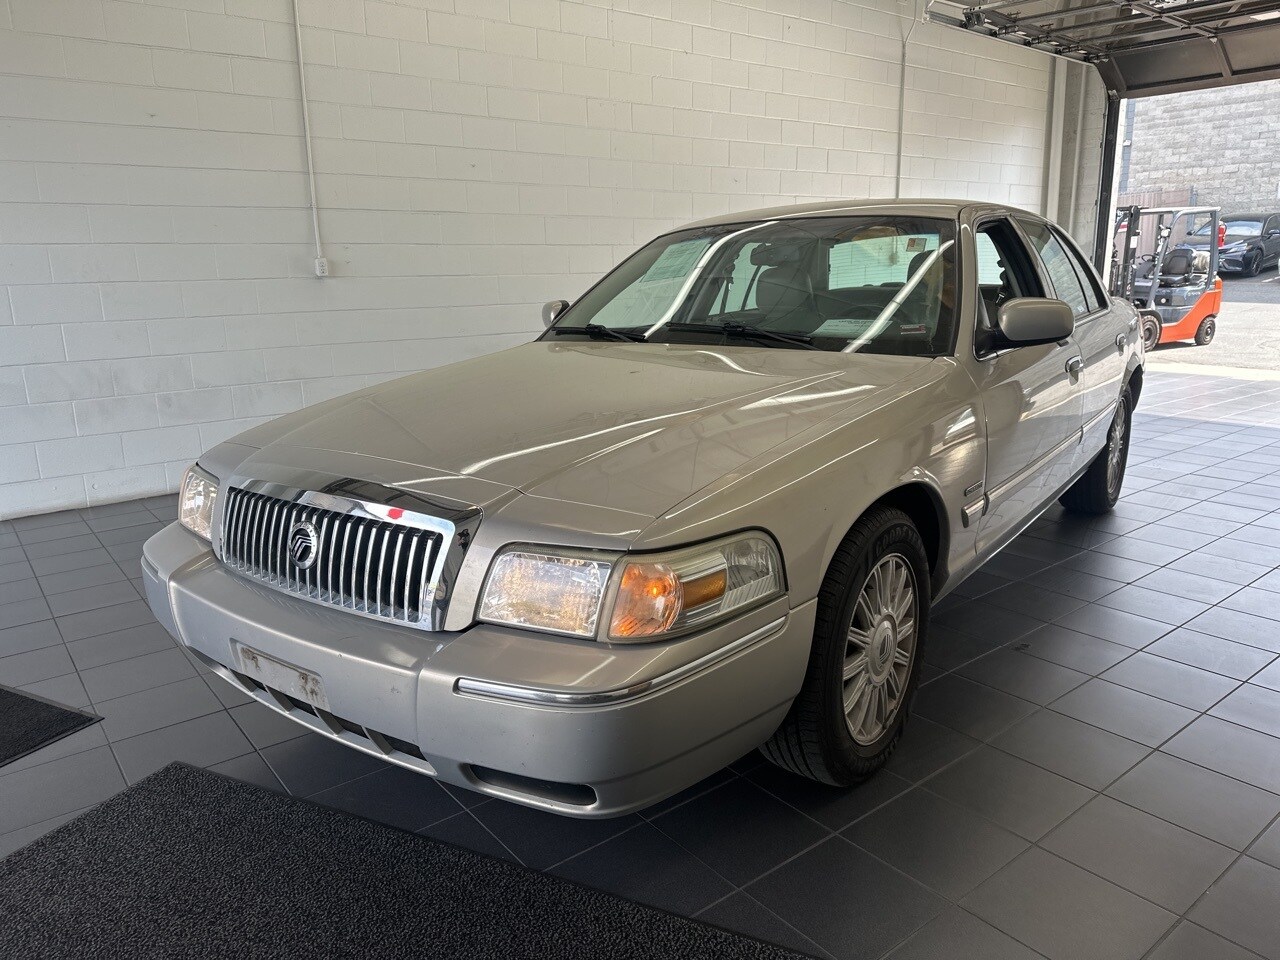 Used 2009 Mercury Grand Marquis LS with VIN 2MEHM75V19X635214 for sale in Springfield, MO